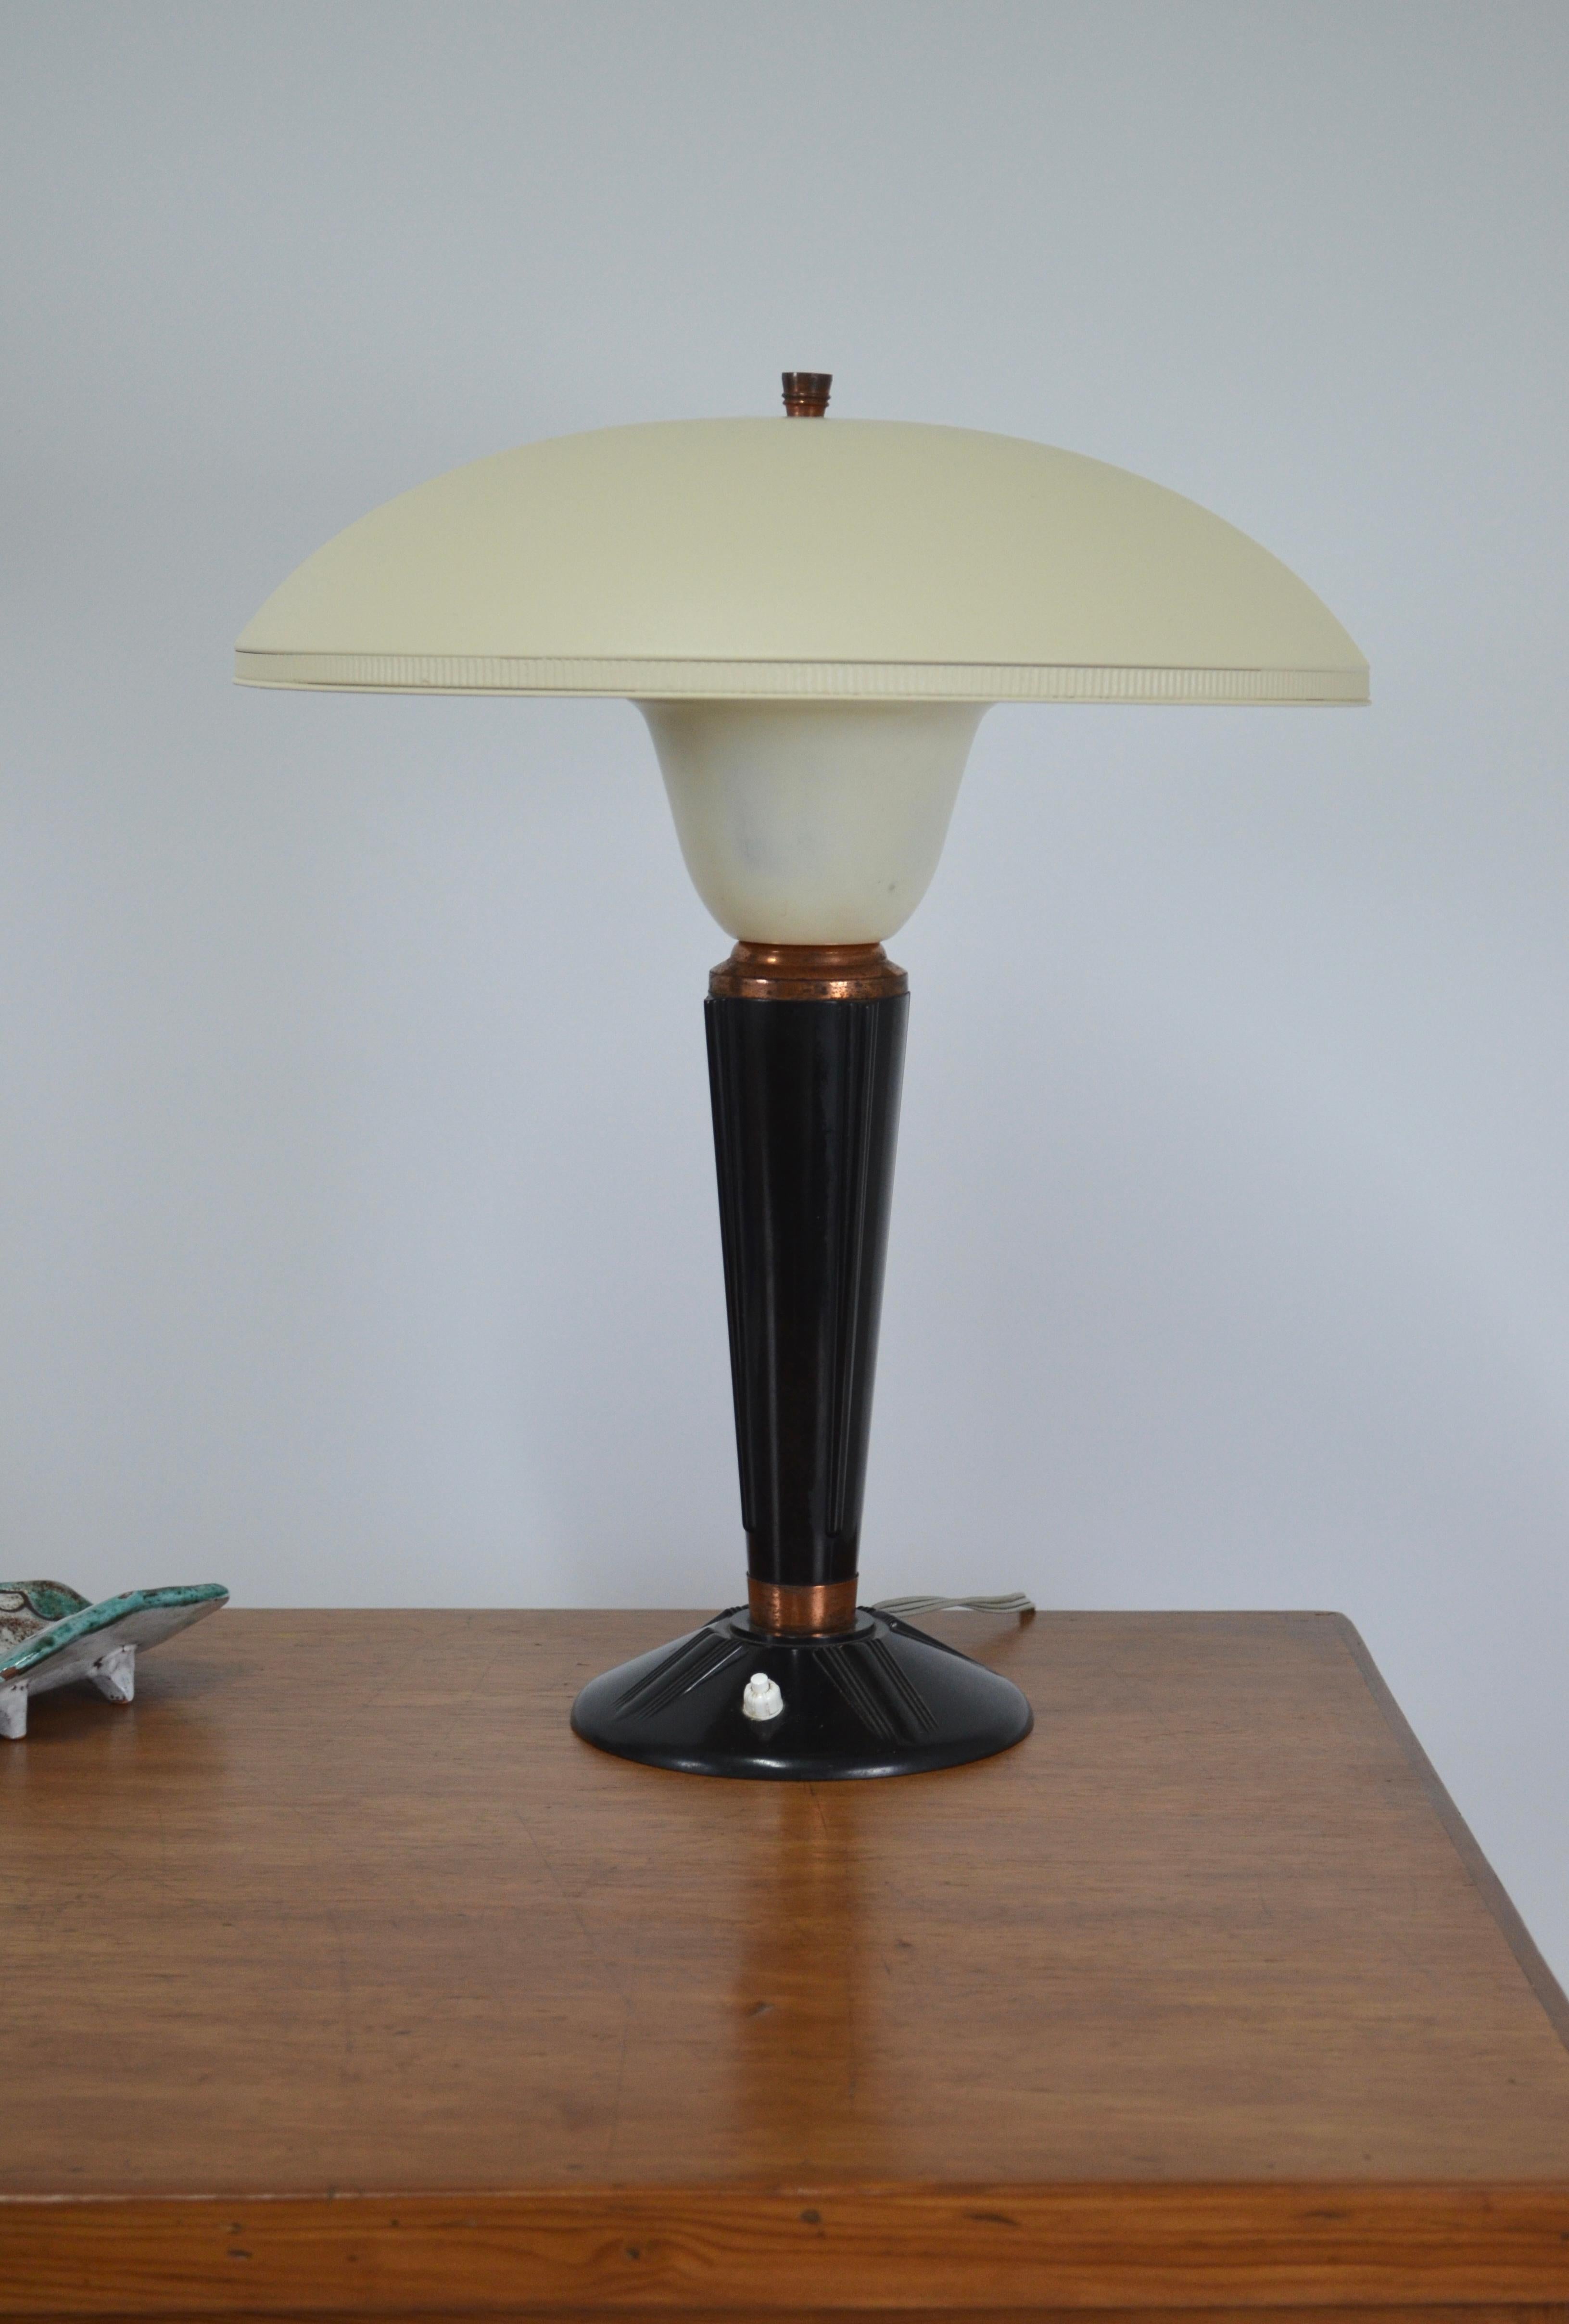 Model 320 lamp from Jumo, France, 1940s
Its body is made of bakelite (ancestor of plastic) with copper rings.
The reflector is made of ivory white color metal. The paint does not appear to be original.
Nice proportions 
Particularly elegant art deco